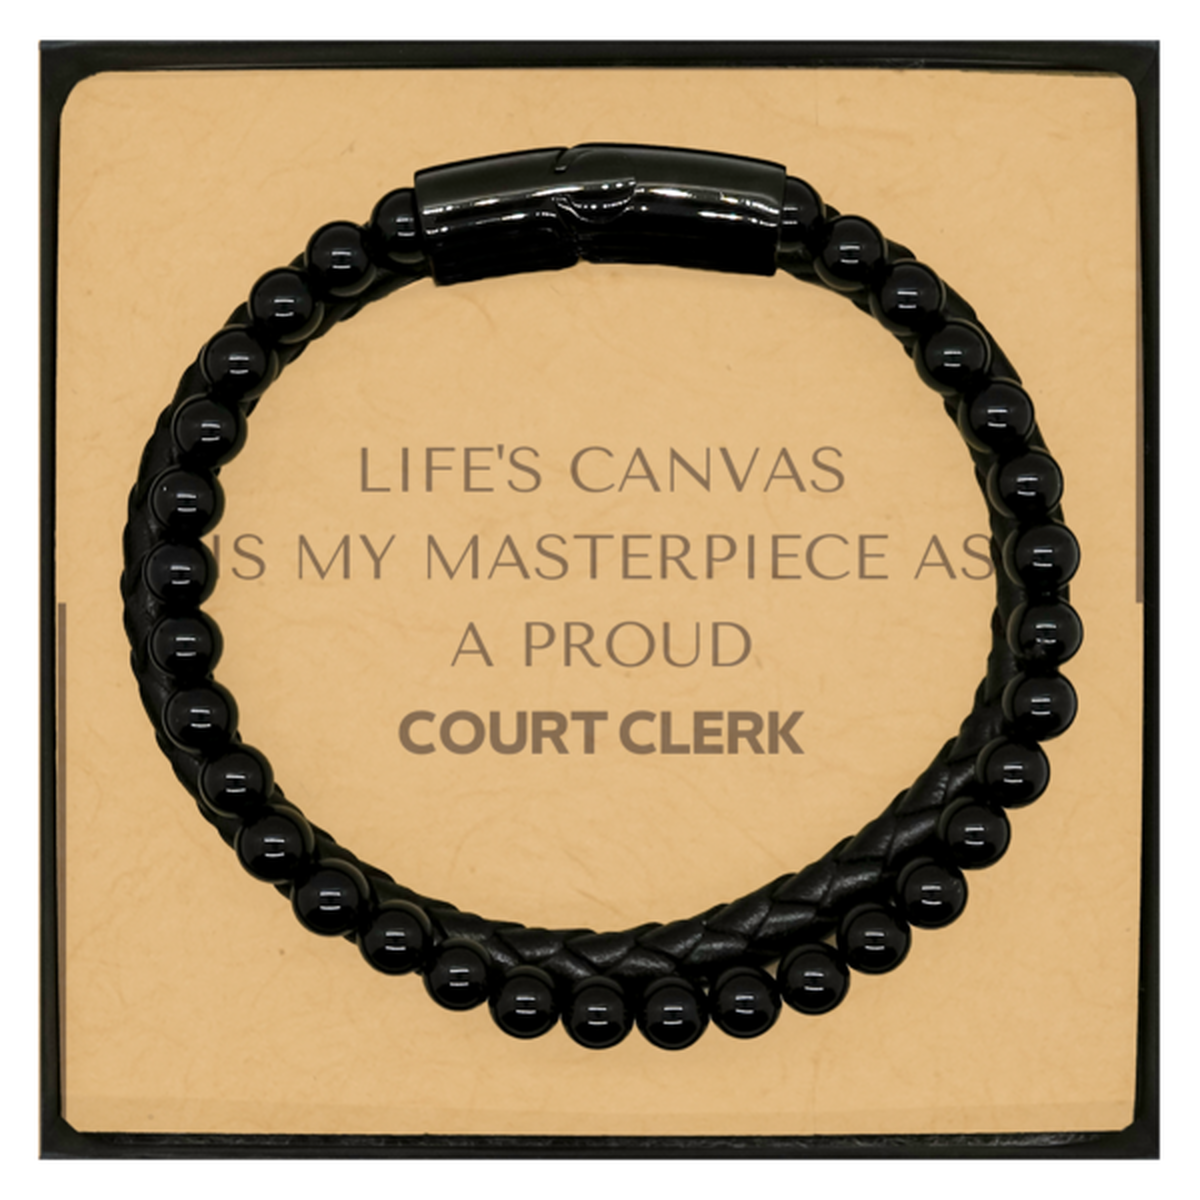 Proud Court Clerk Gifts, Life's canvas is my masterpiece, Epic Birthday Christmas Unique Stone Leather Bracelets For Court Clerk, Coworkers, Men, Women, Friends